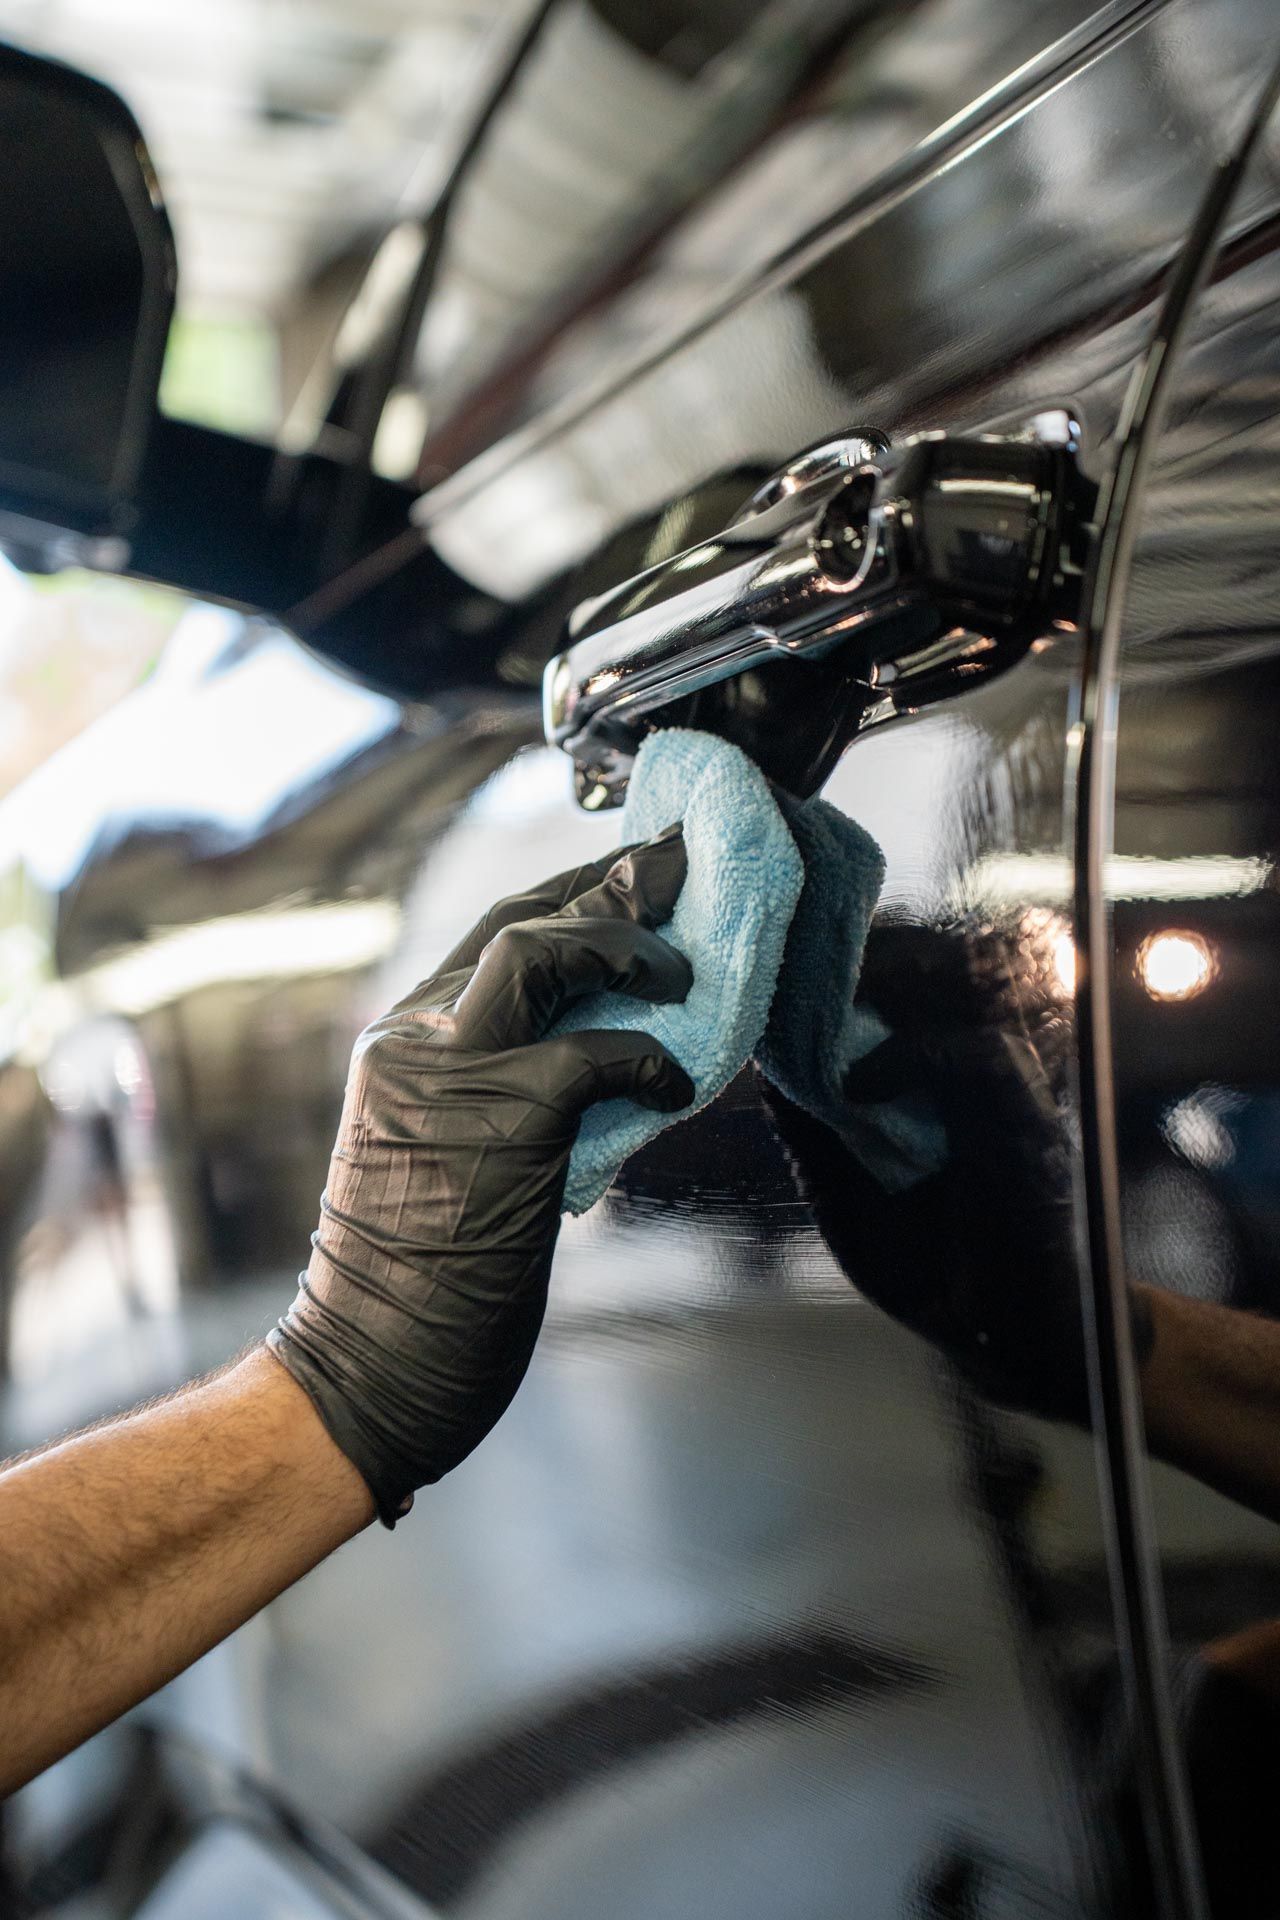 Ceramic Coating - A person wearing black gloves is cleaning a car with a blue cloth